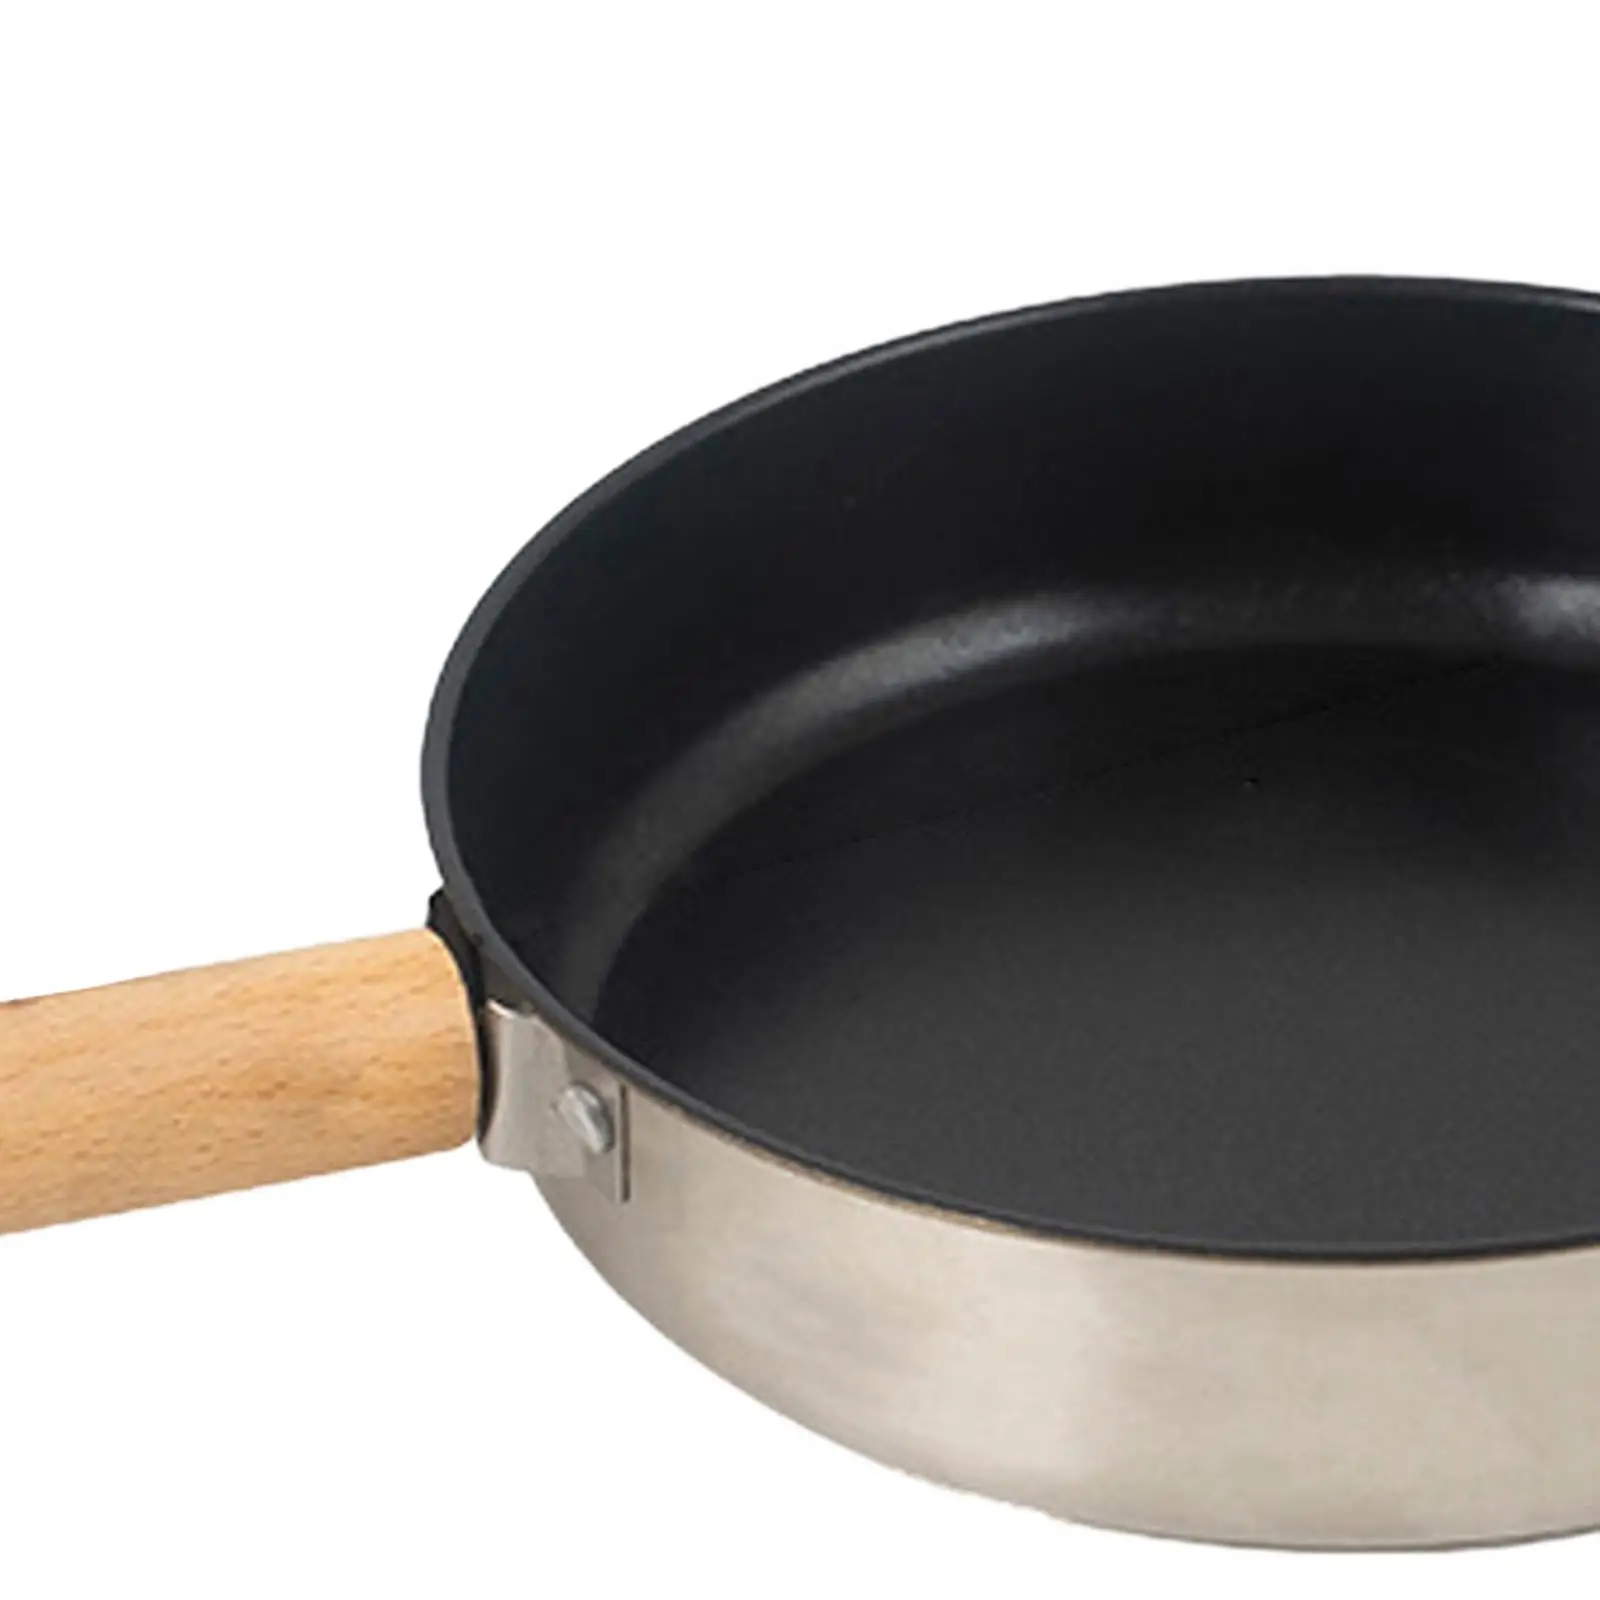 Nonstick Frying Pan with Wooden Handle, Flat Griddle Pan, Camping Fry Pan for